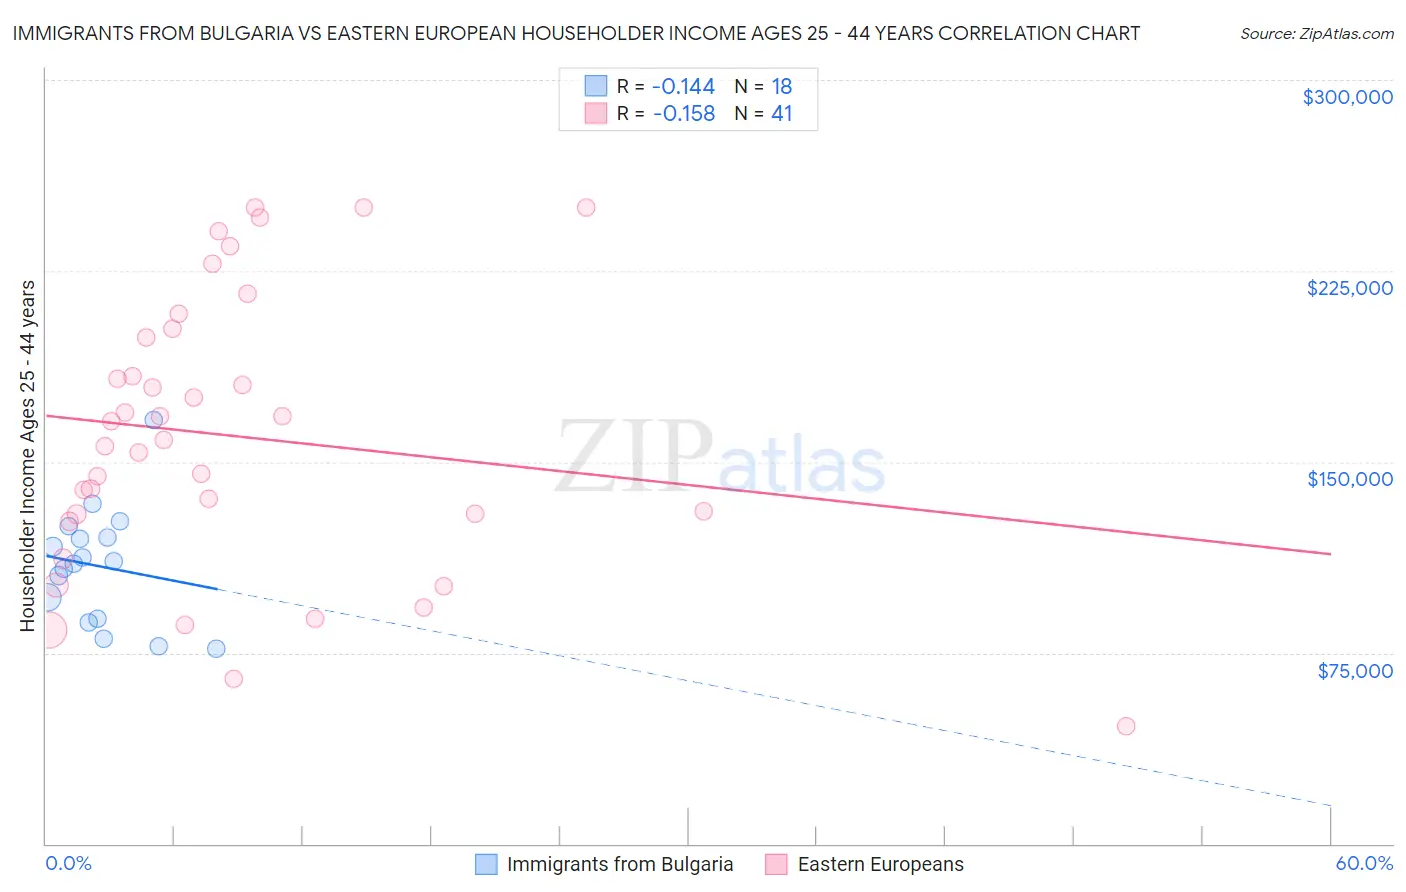 Immigrants from Bulgaria vs Eastern European Householder Income Ages 25 - 44 years